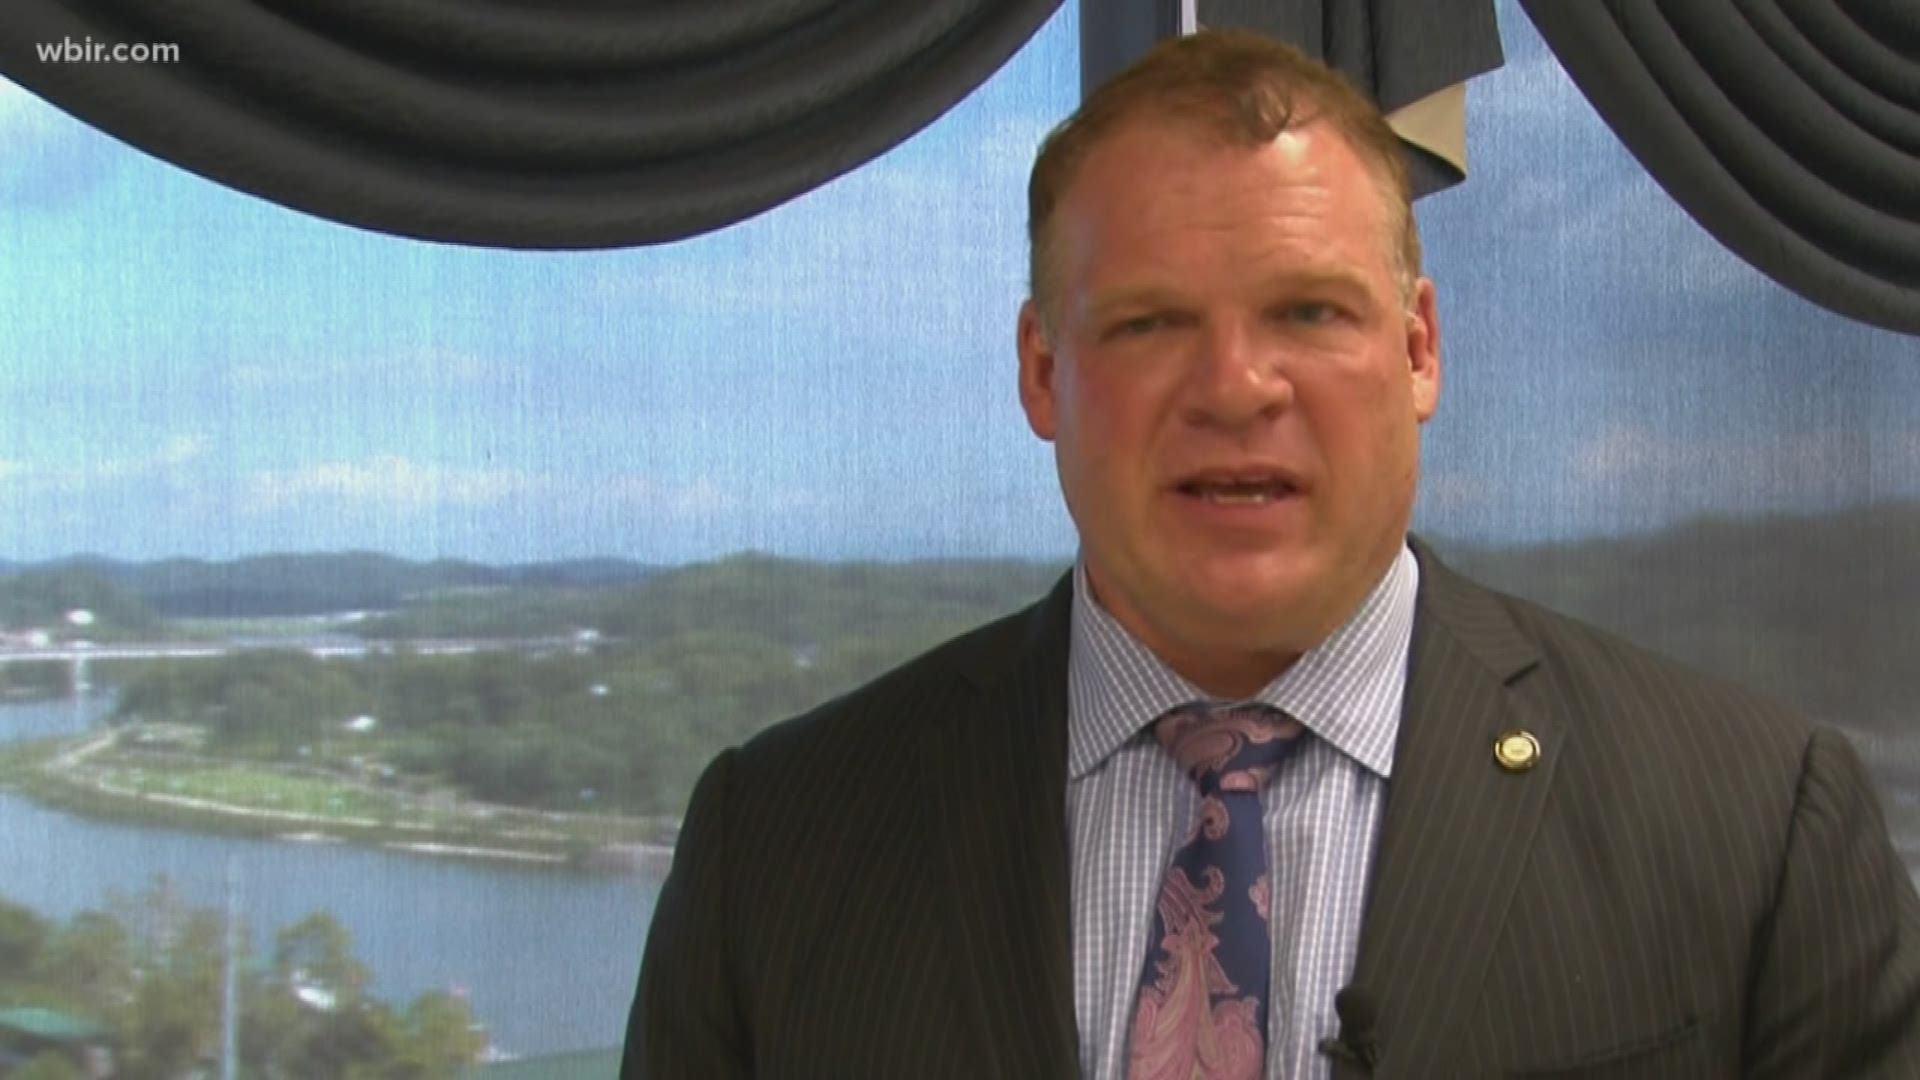 Knox County Mayor Glenn Jacobs, who is also known as wrestler "Kane," requested the donation in appreciation for making WWE appearances this fall, according to the release.